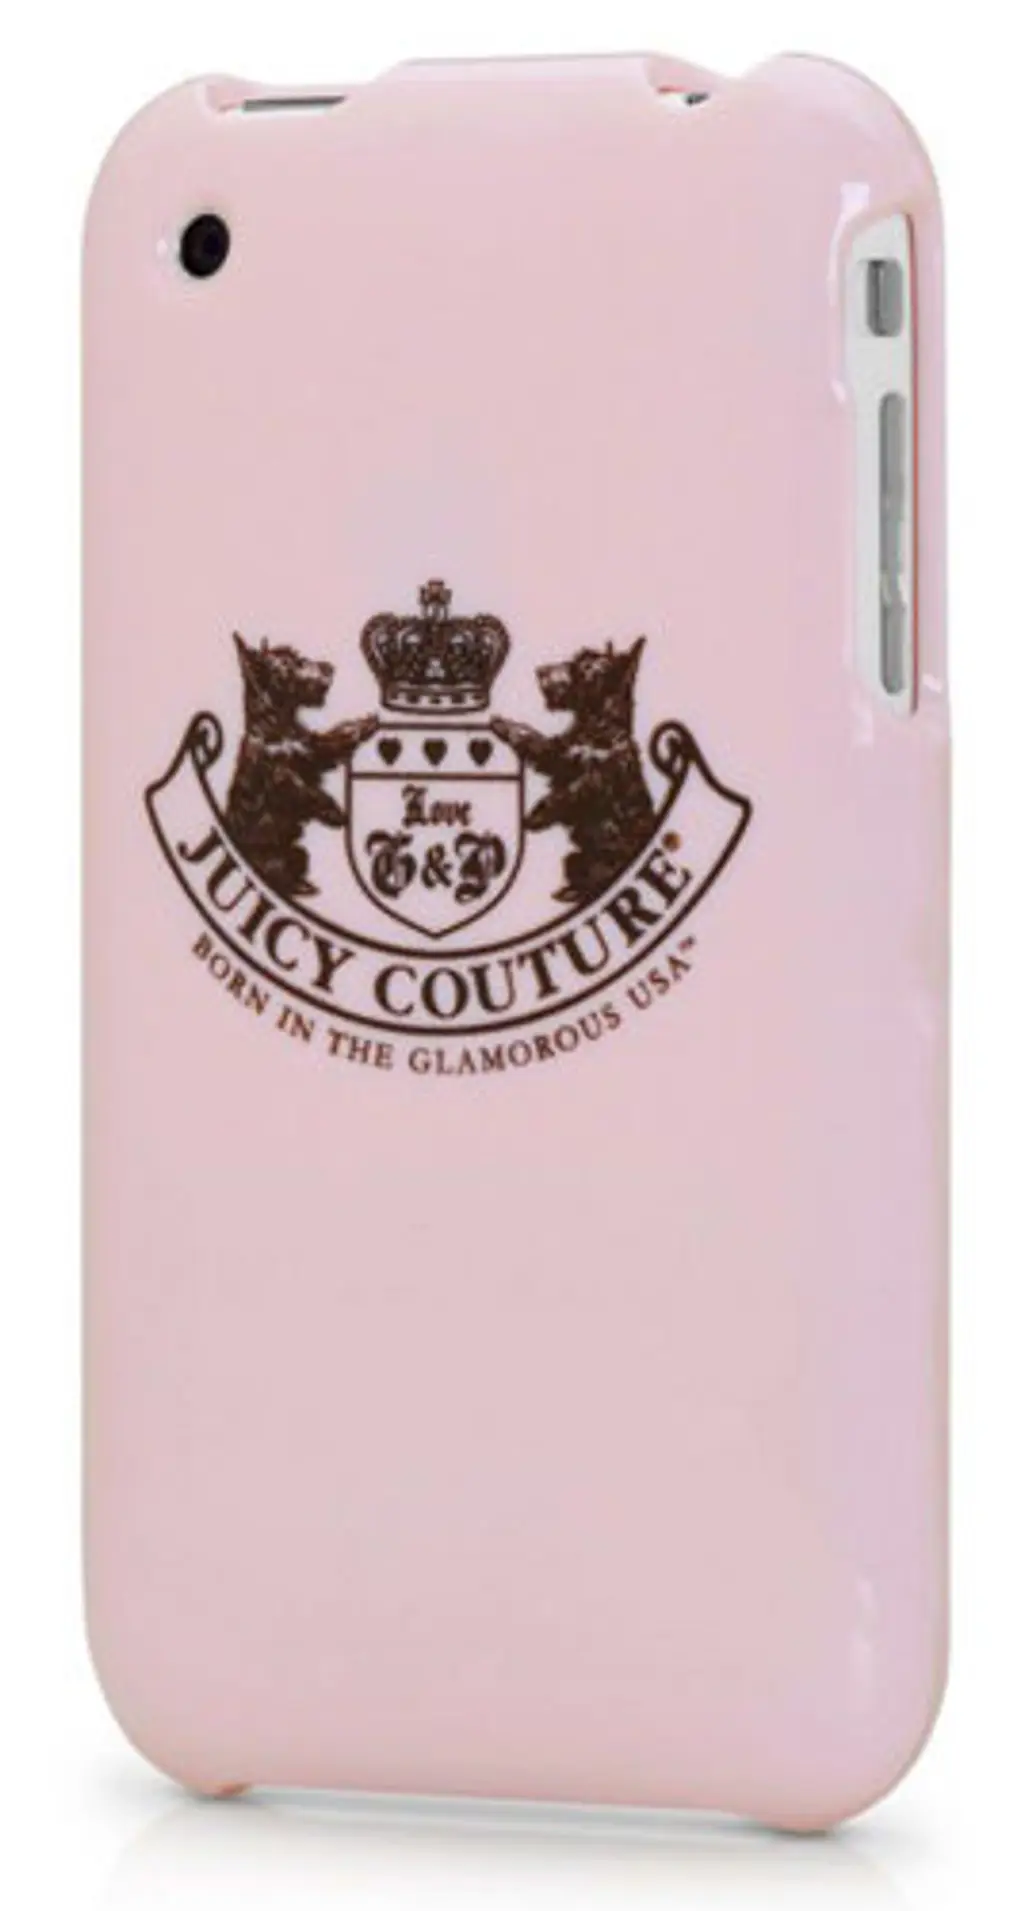 Juicy Couture Crest Case for IPhone 3GS